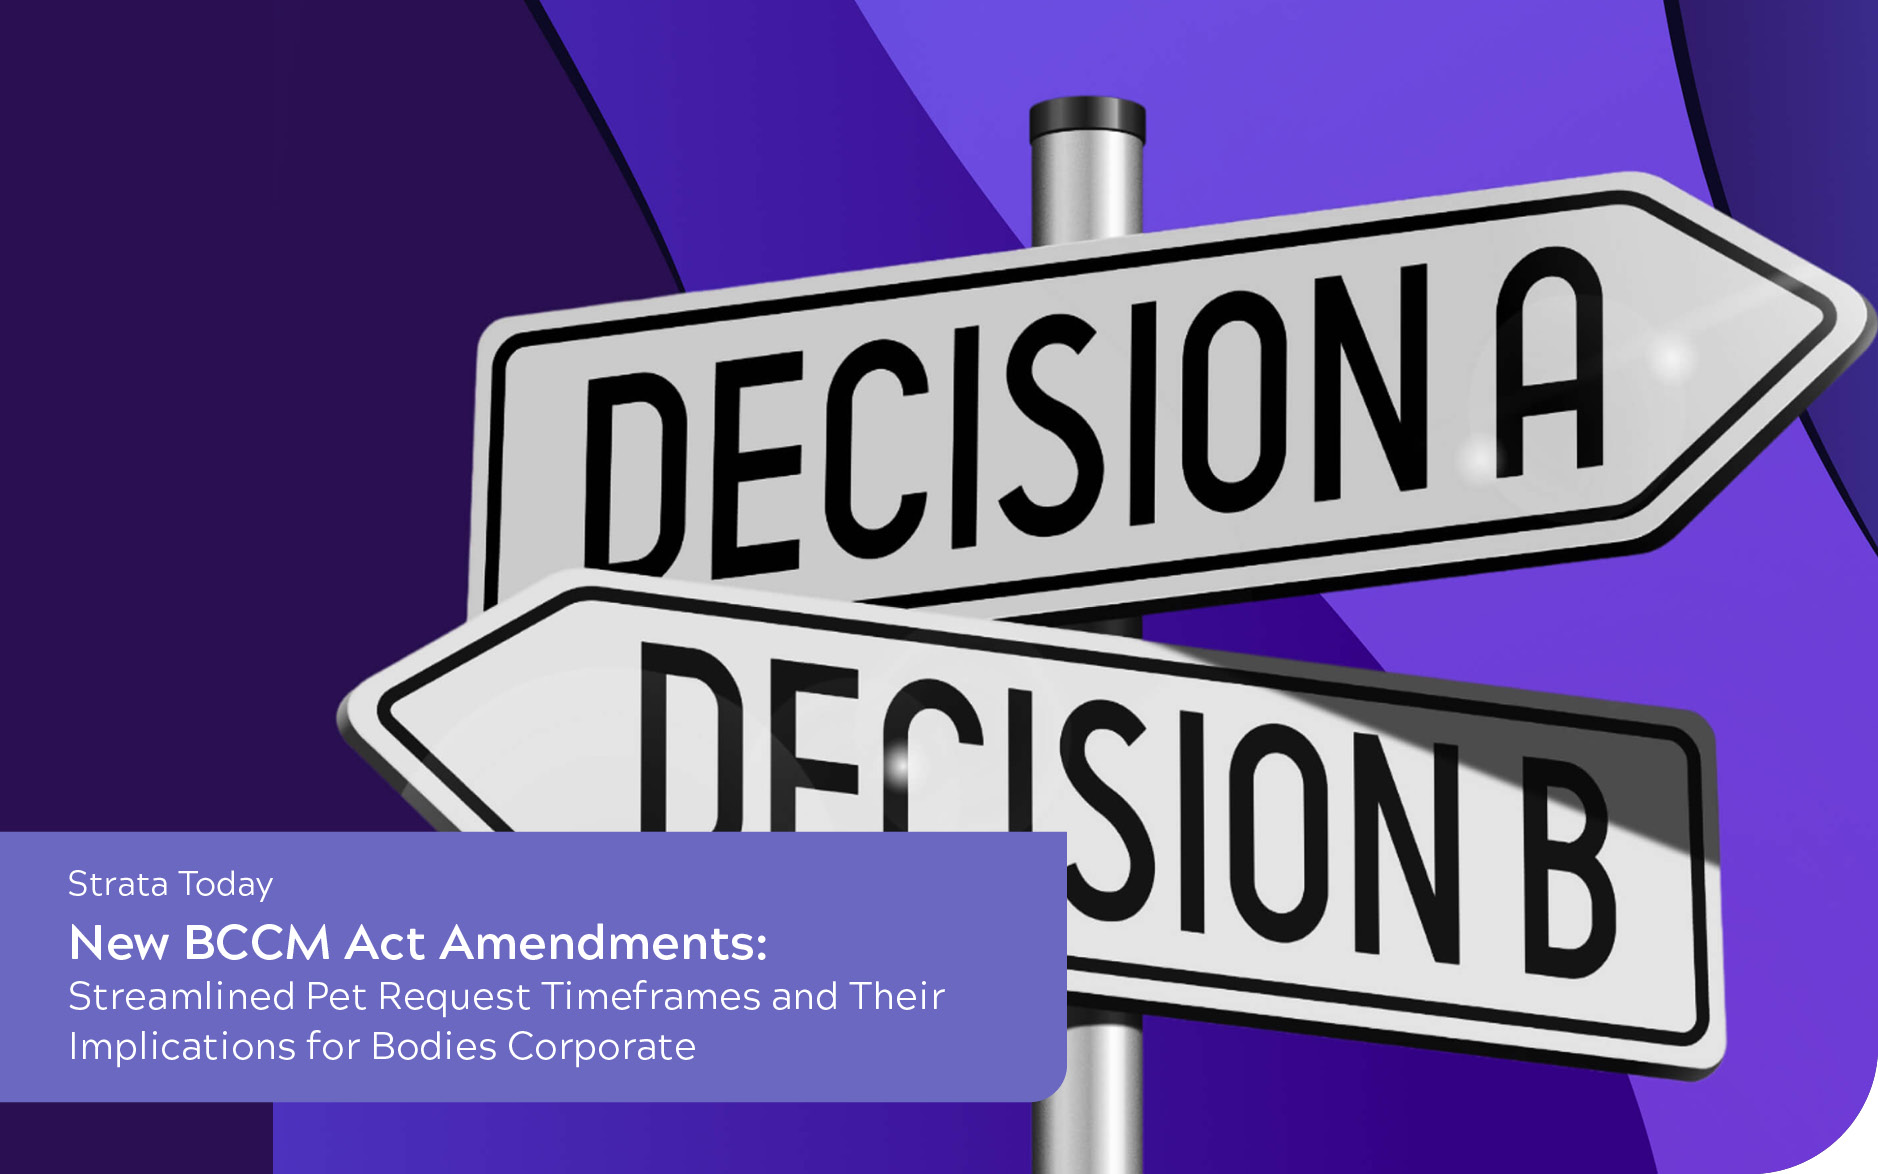 New BCCM Act Amendments: Streamlined Pet Request Timeframes and Their Implications for Bodies Corporate.